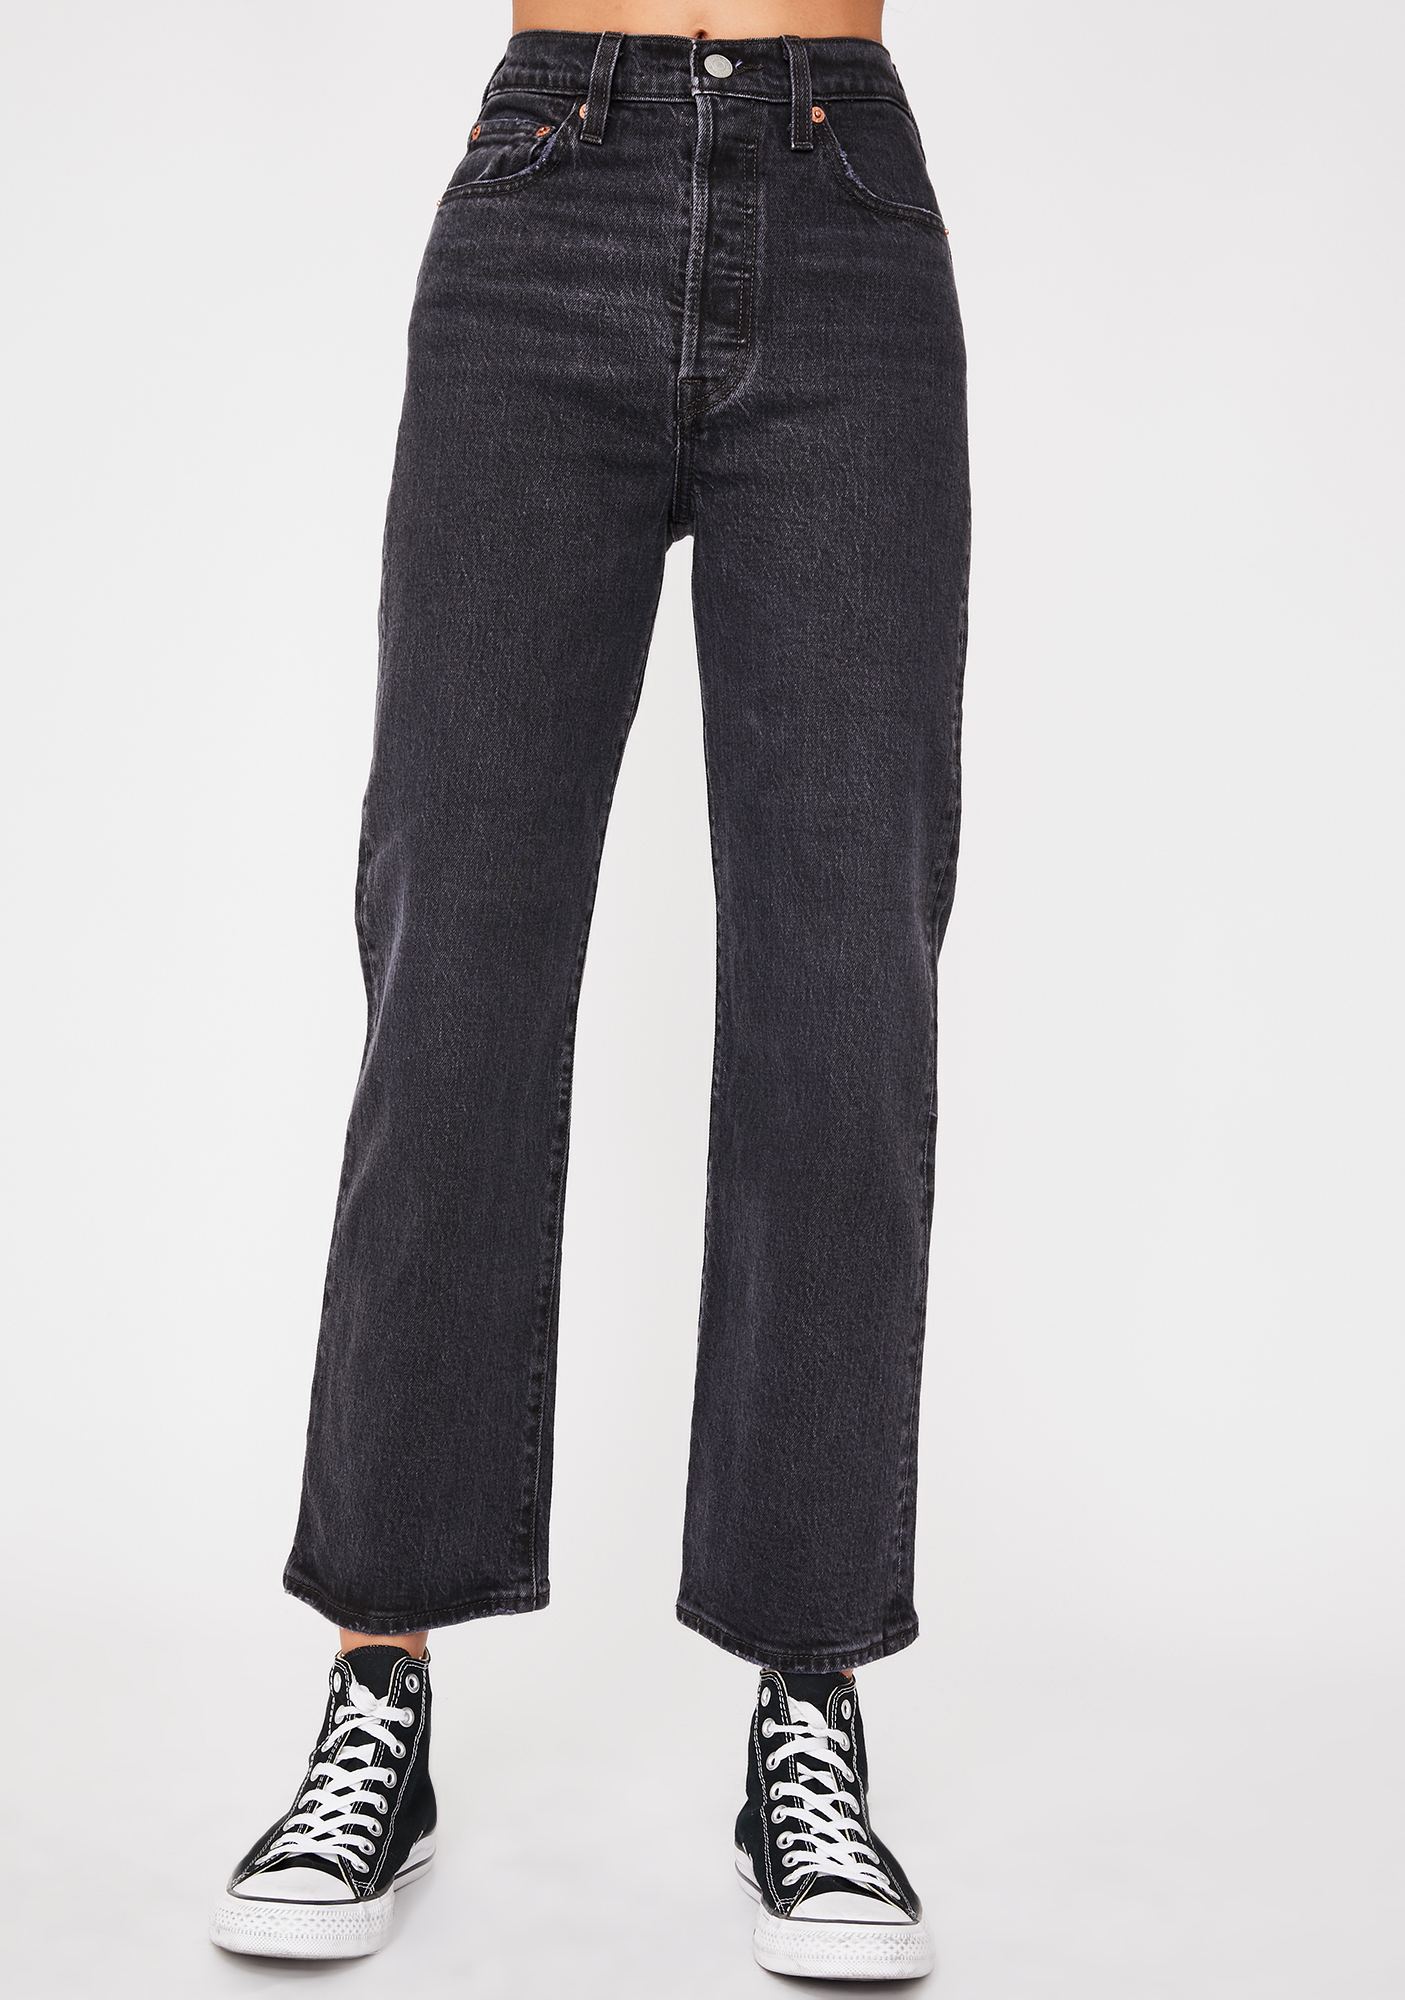 Levis Feelin Cagey Luxembourg, SAVE 45% 